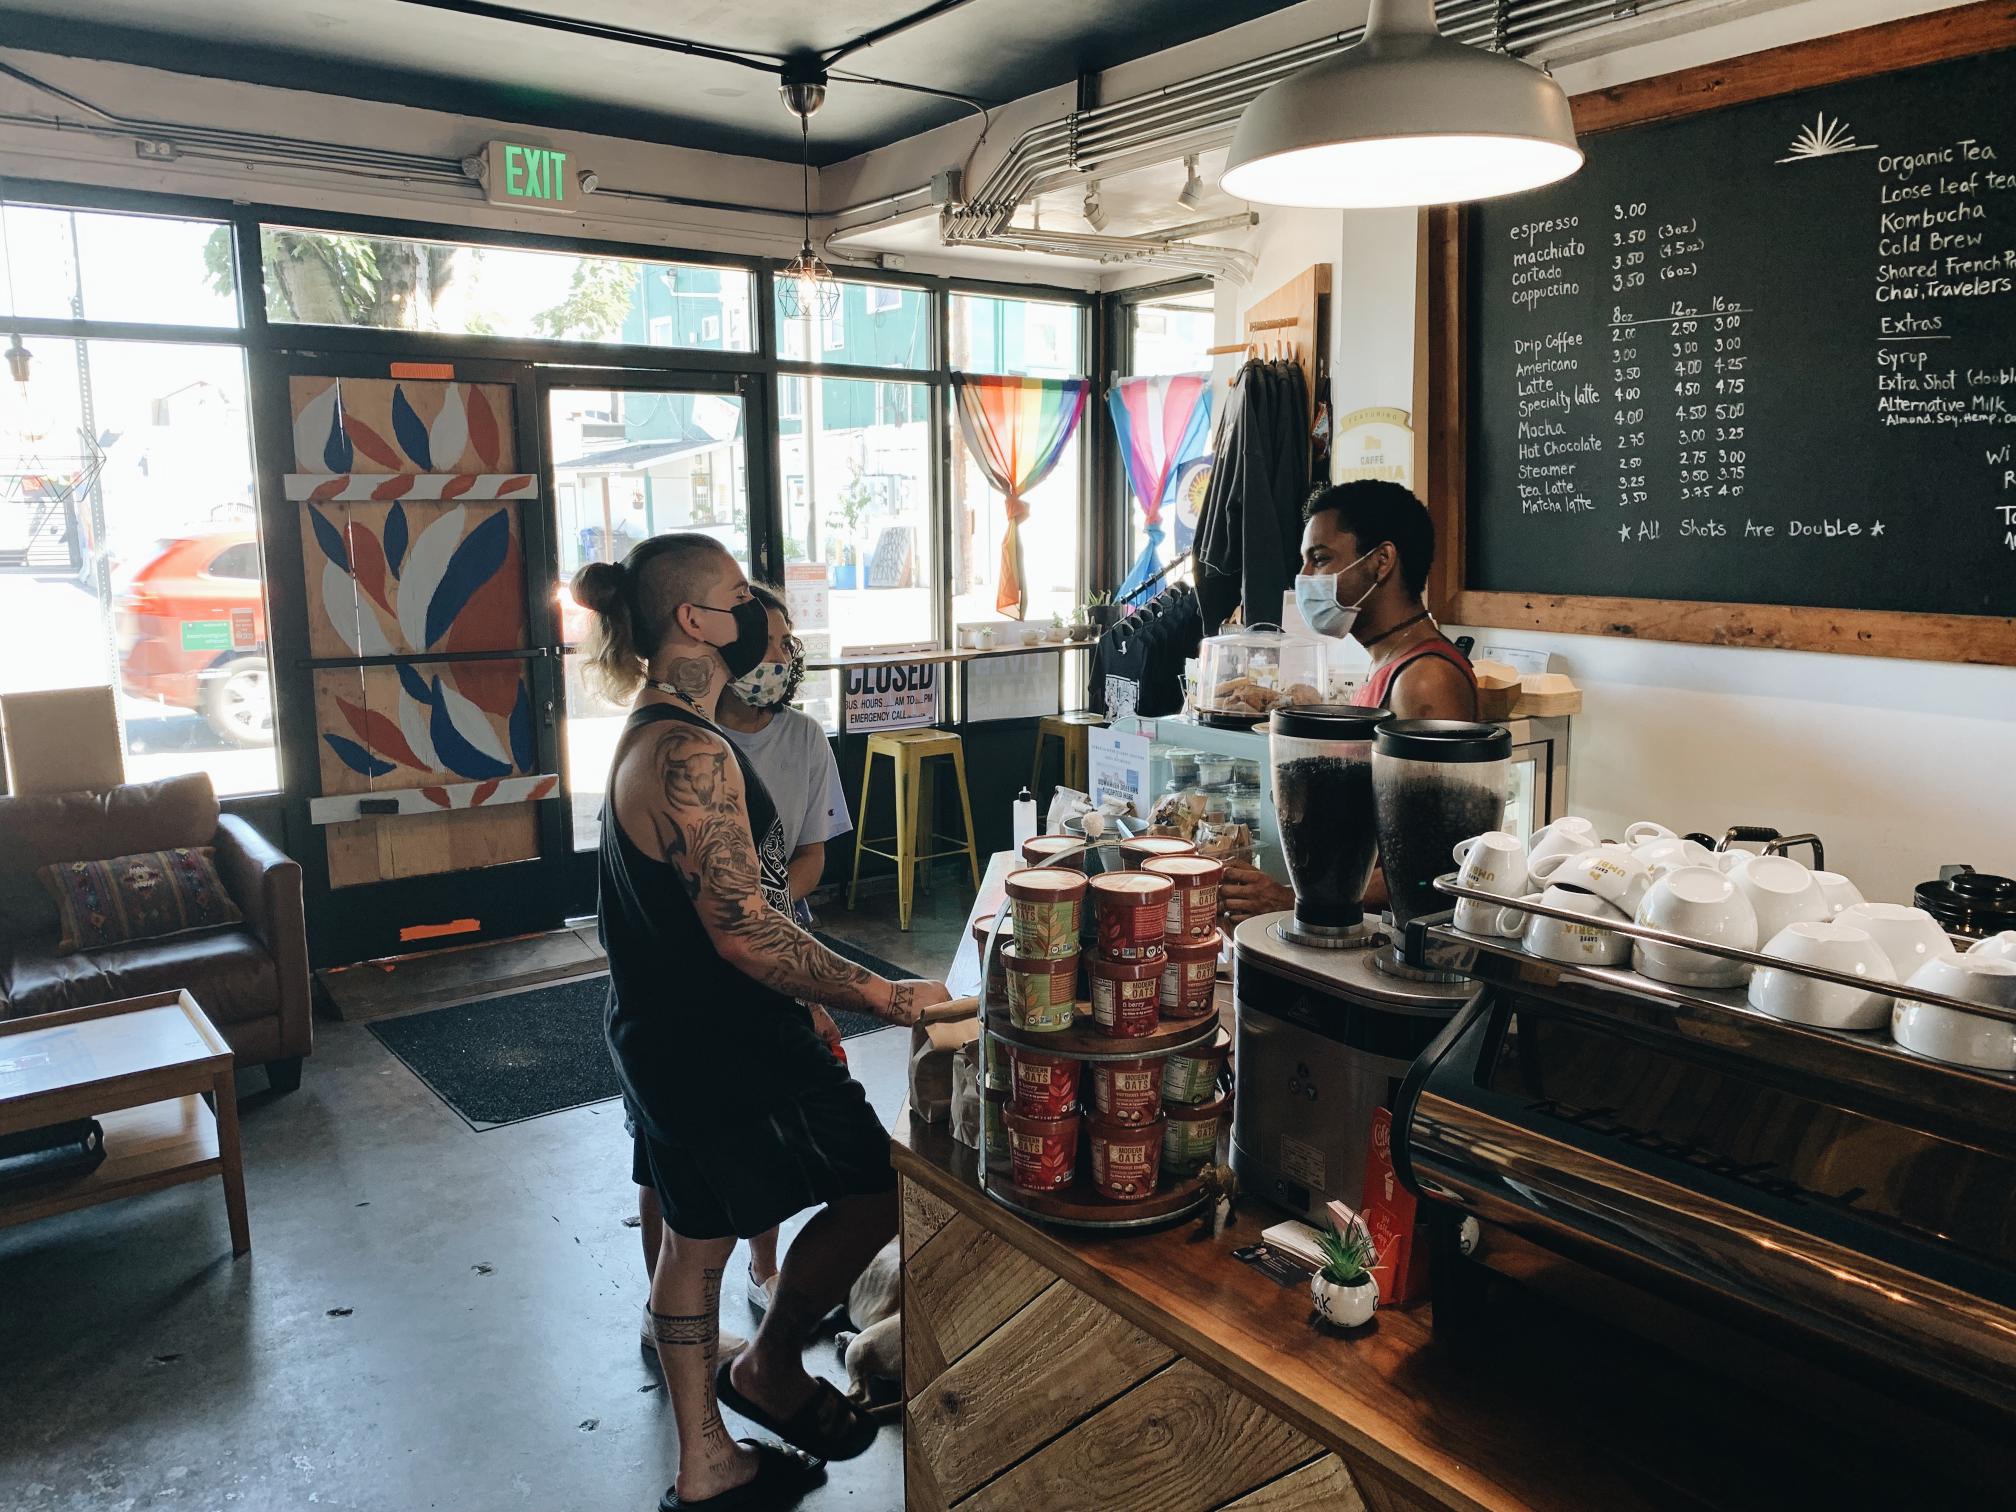 Two community members stand inside a coffee shop in West Seattle in June 2021. They are greeted by an employee standing behind the counter, under a large menu with drinks written on a chalk board. All three people pictured are wearing masks, and the street is visible in the background, through large windows.